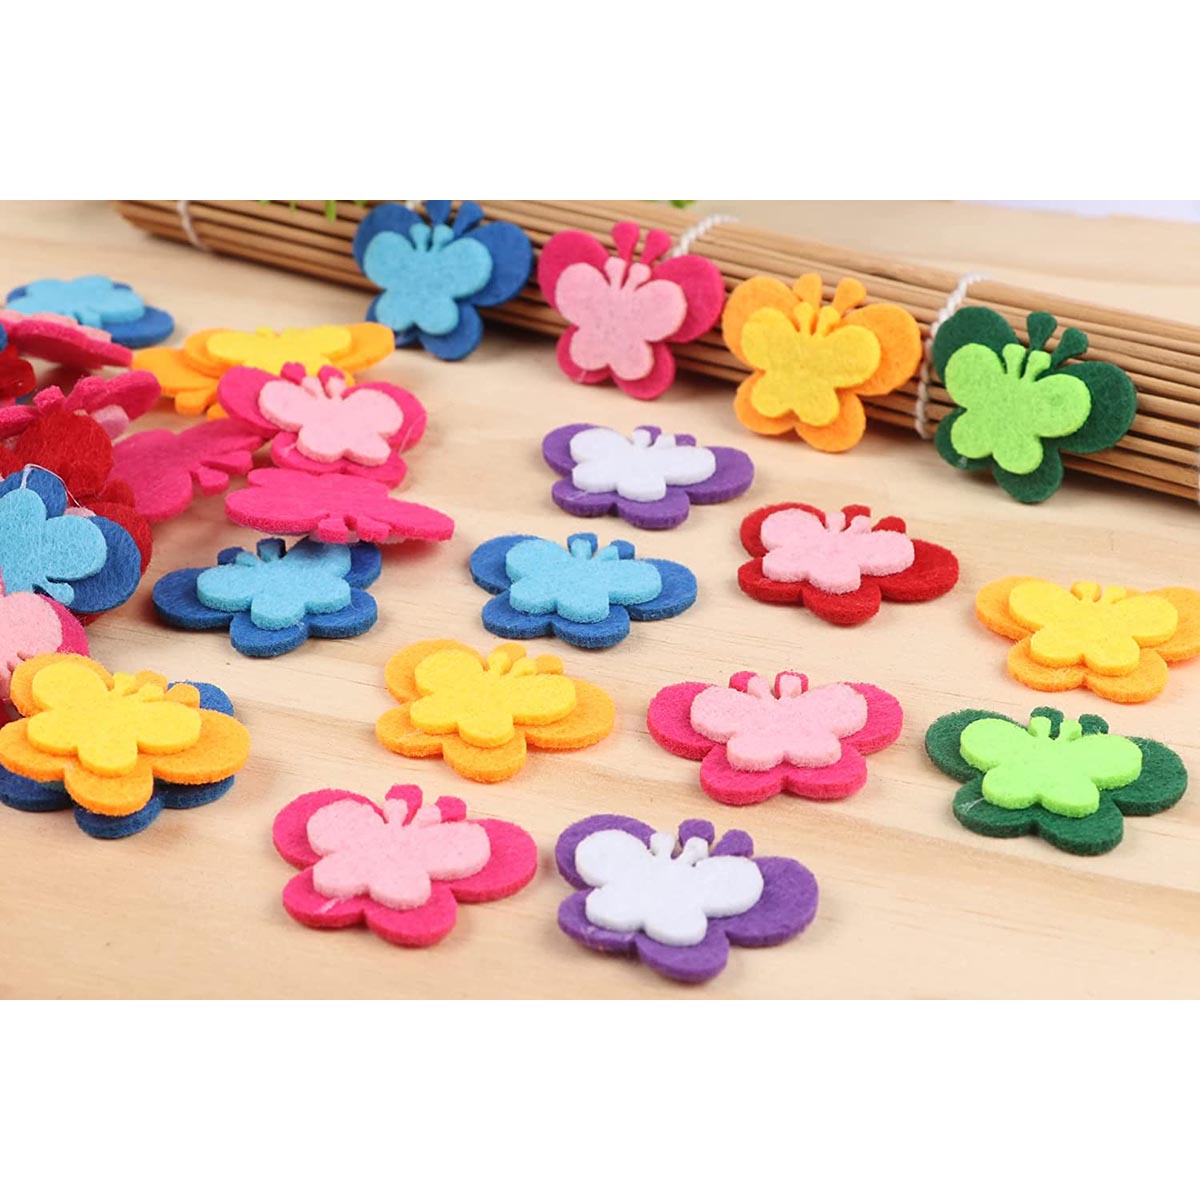 50pcs 2-Layer Stiff Felt Butterfly Fabric Embellishments,1.5 Inch Mix Color